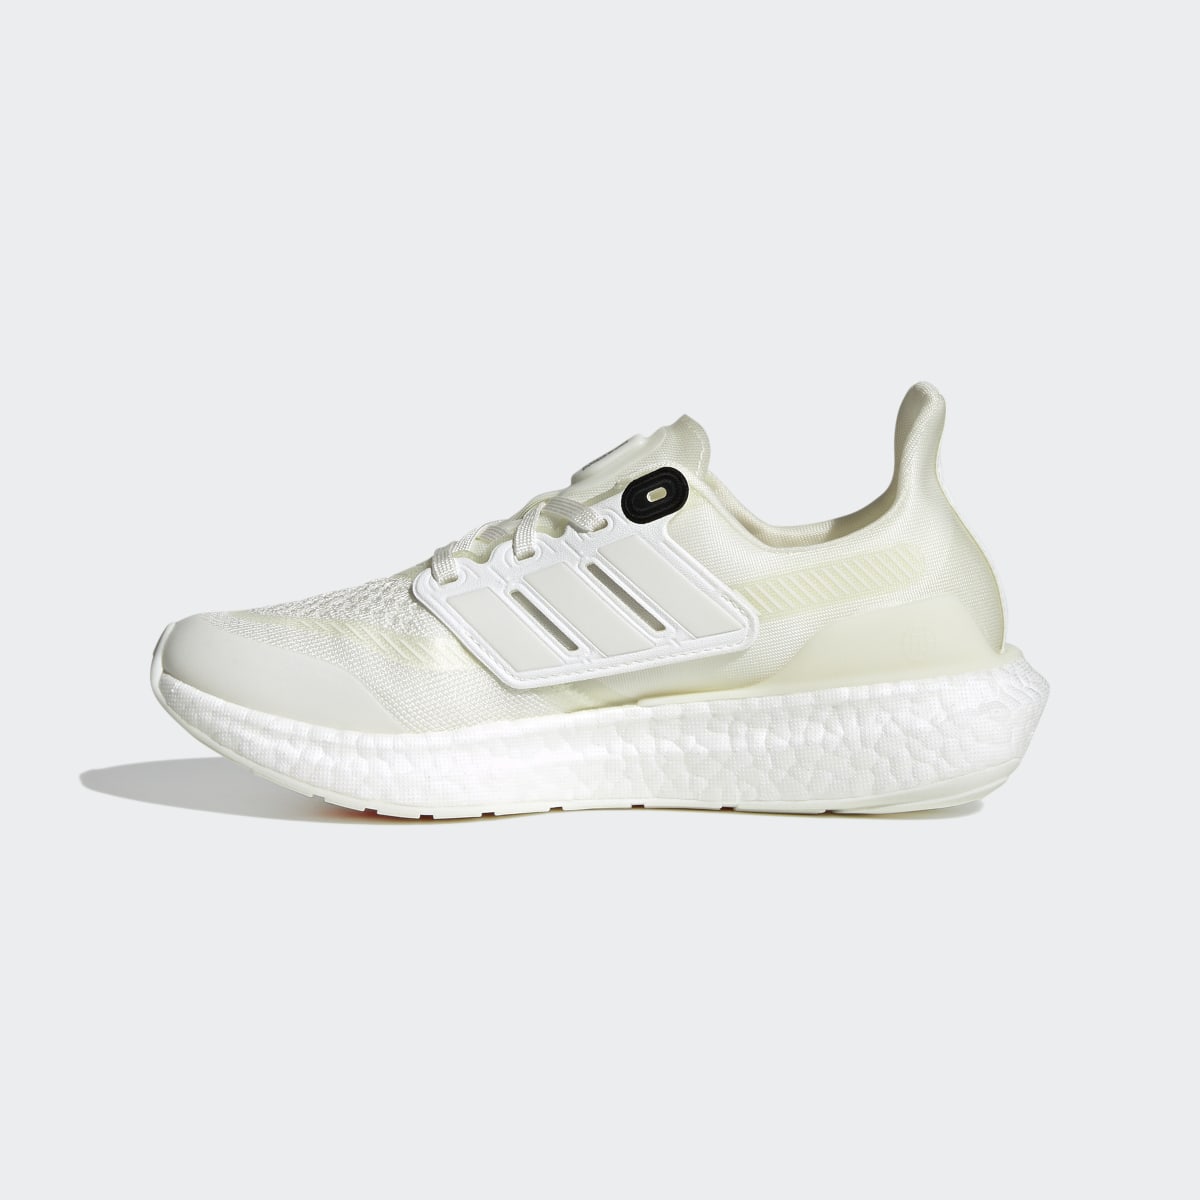 Adidas Sapatilhas Made to Be Remade Ultraboost 2.0. 10